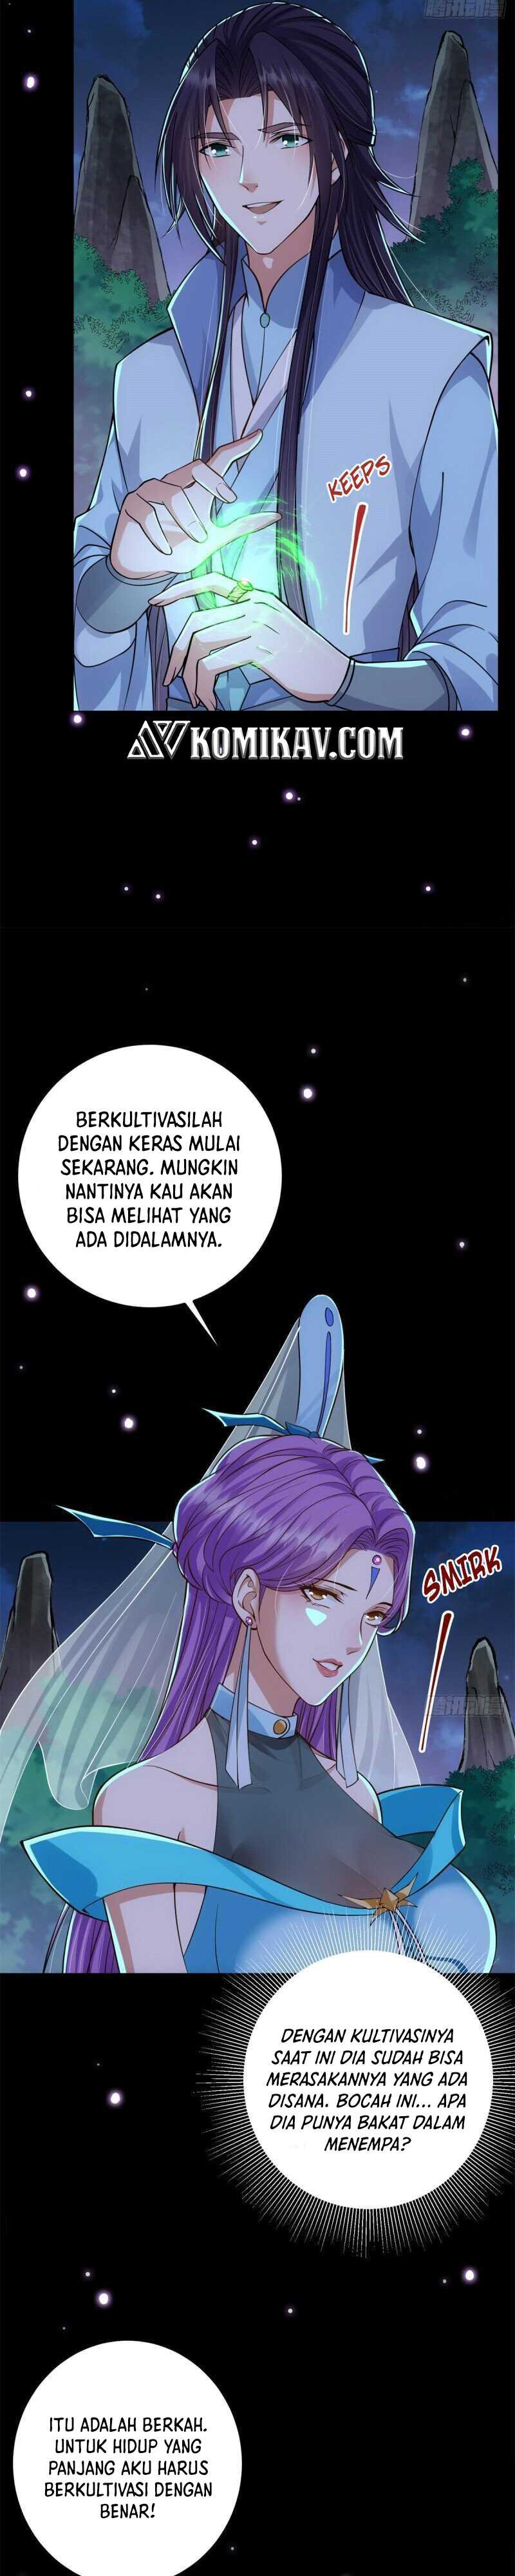 Keep A Low Profile, Sect Leader Chapter 18 Bahasa Indonesia